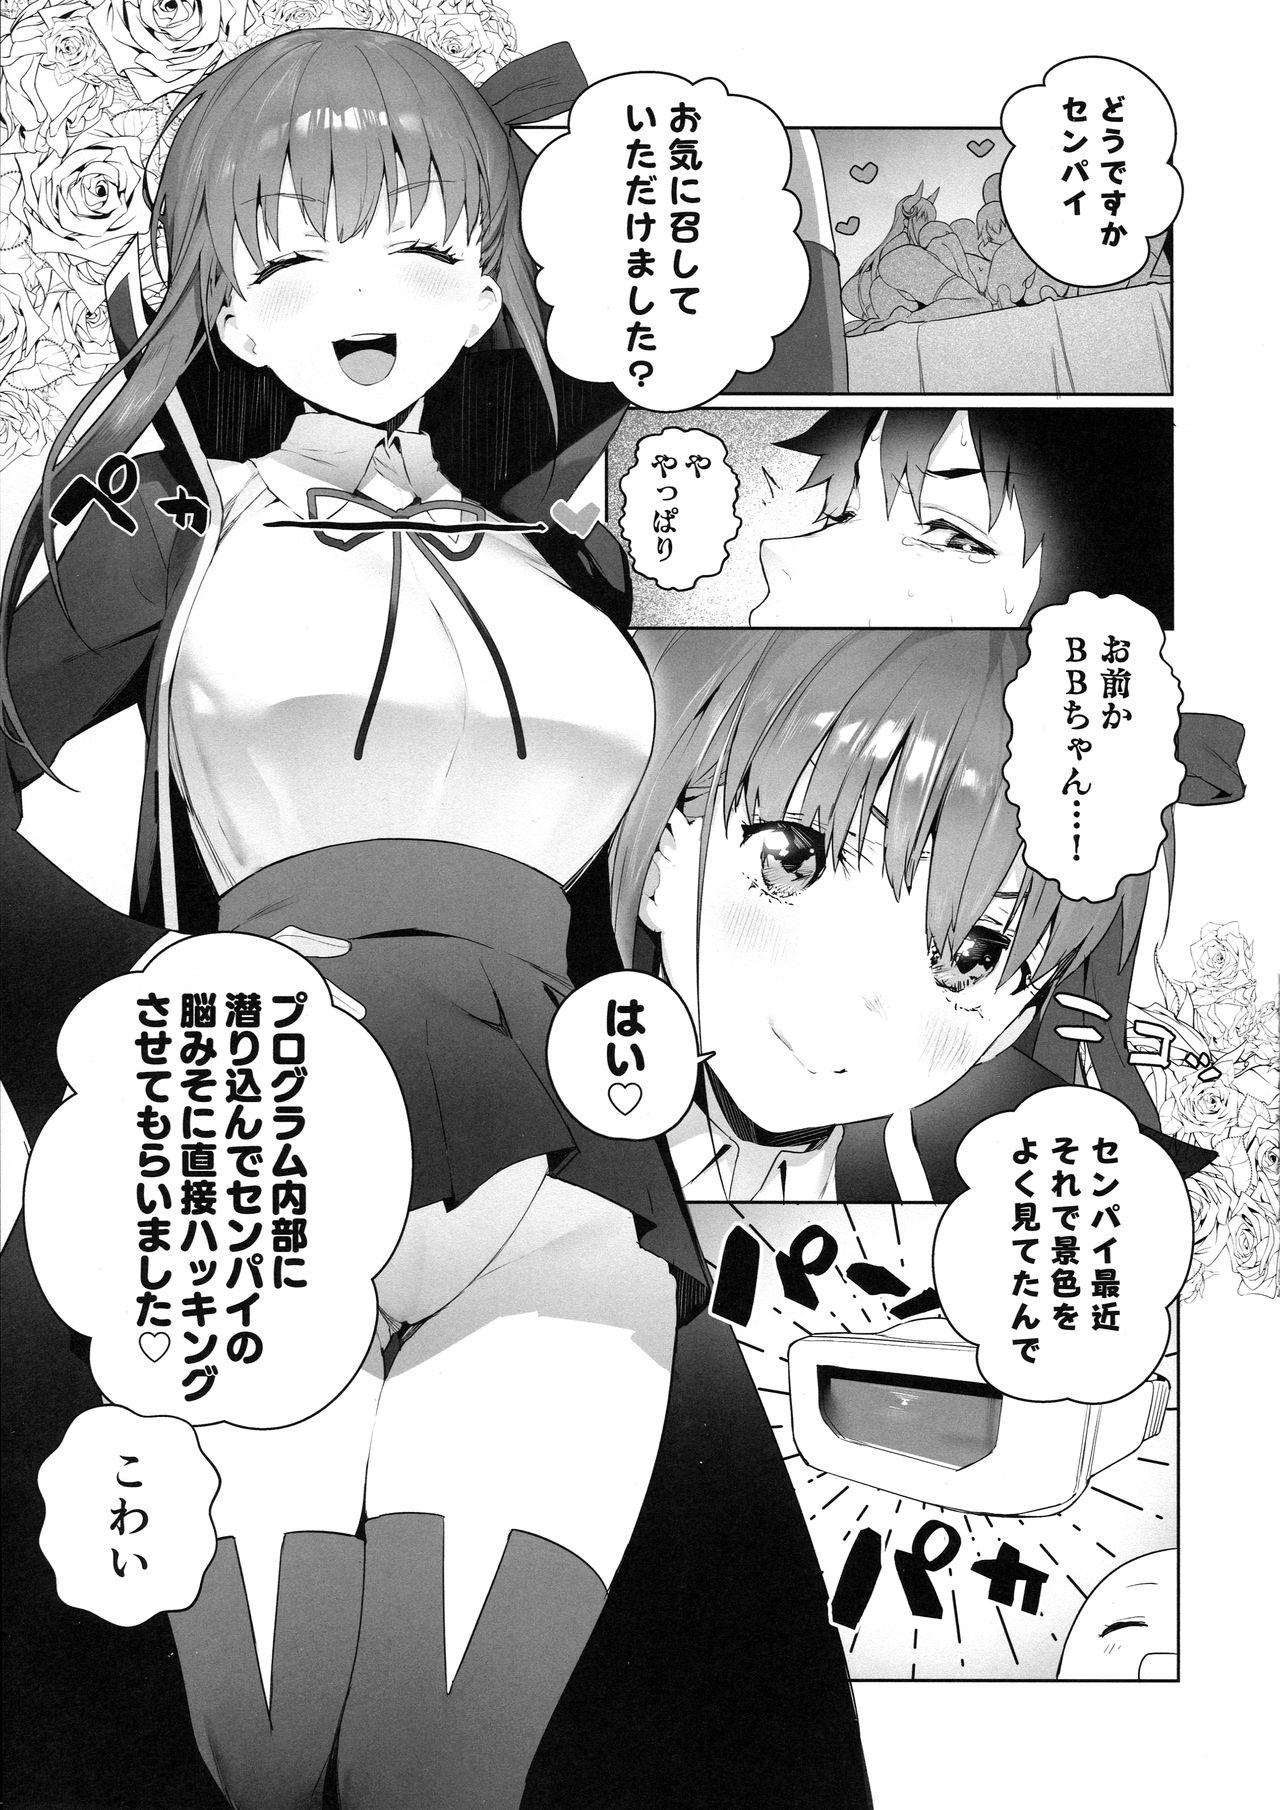 Teen Porn LOVELESS - Fate grand order Reverse Cowgirl - Page 4